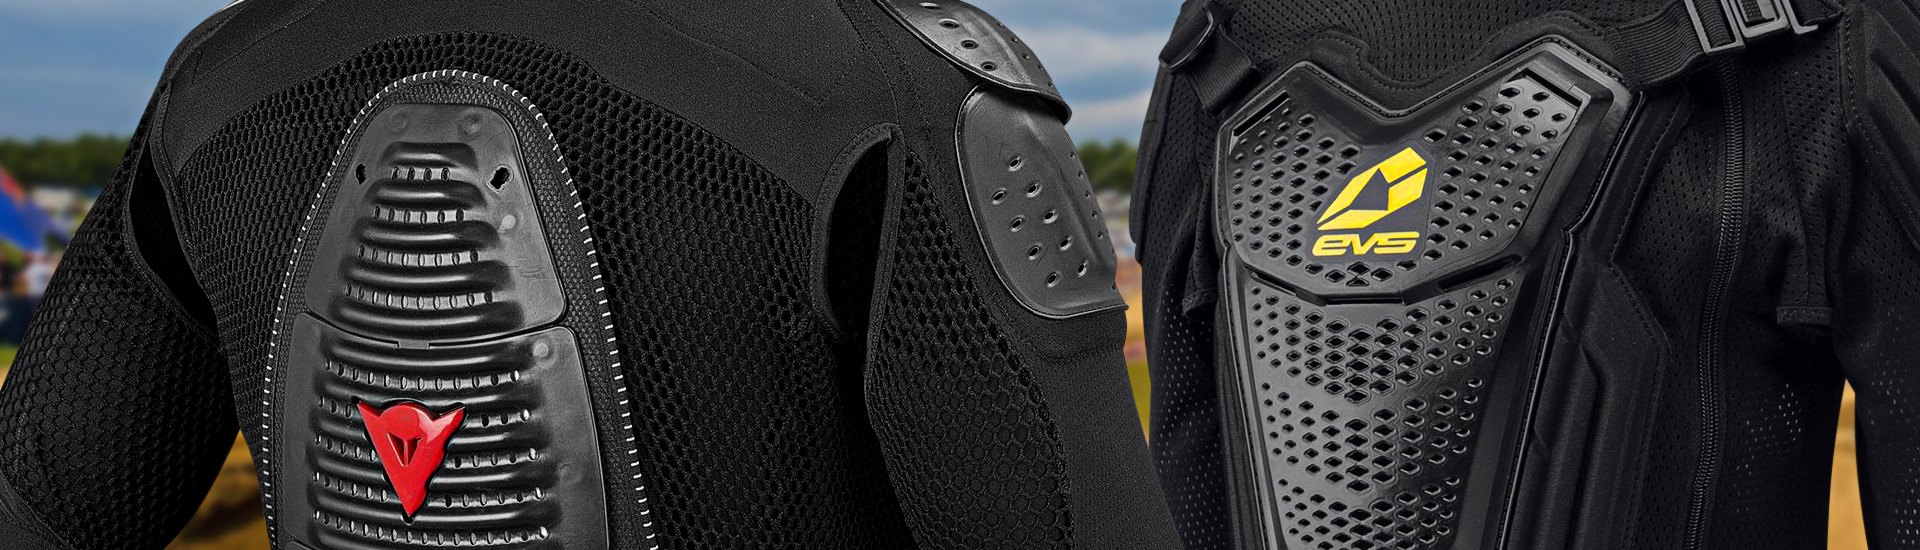 Motorcycle Chest & Back Protection